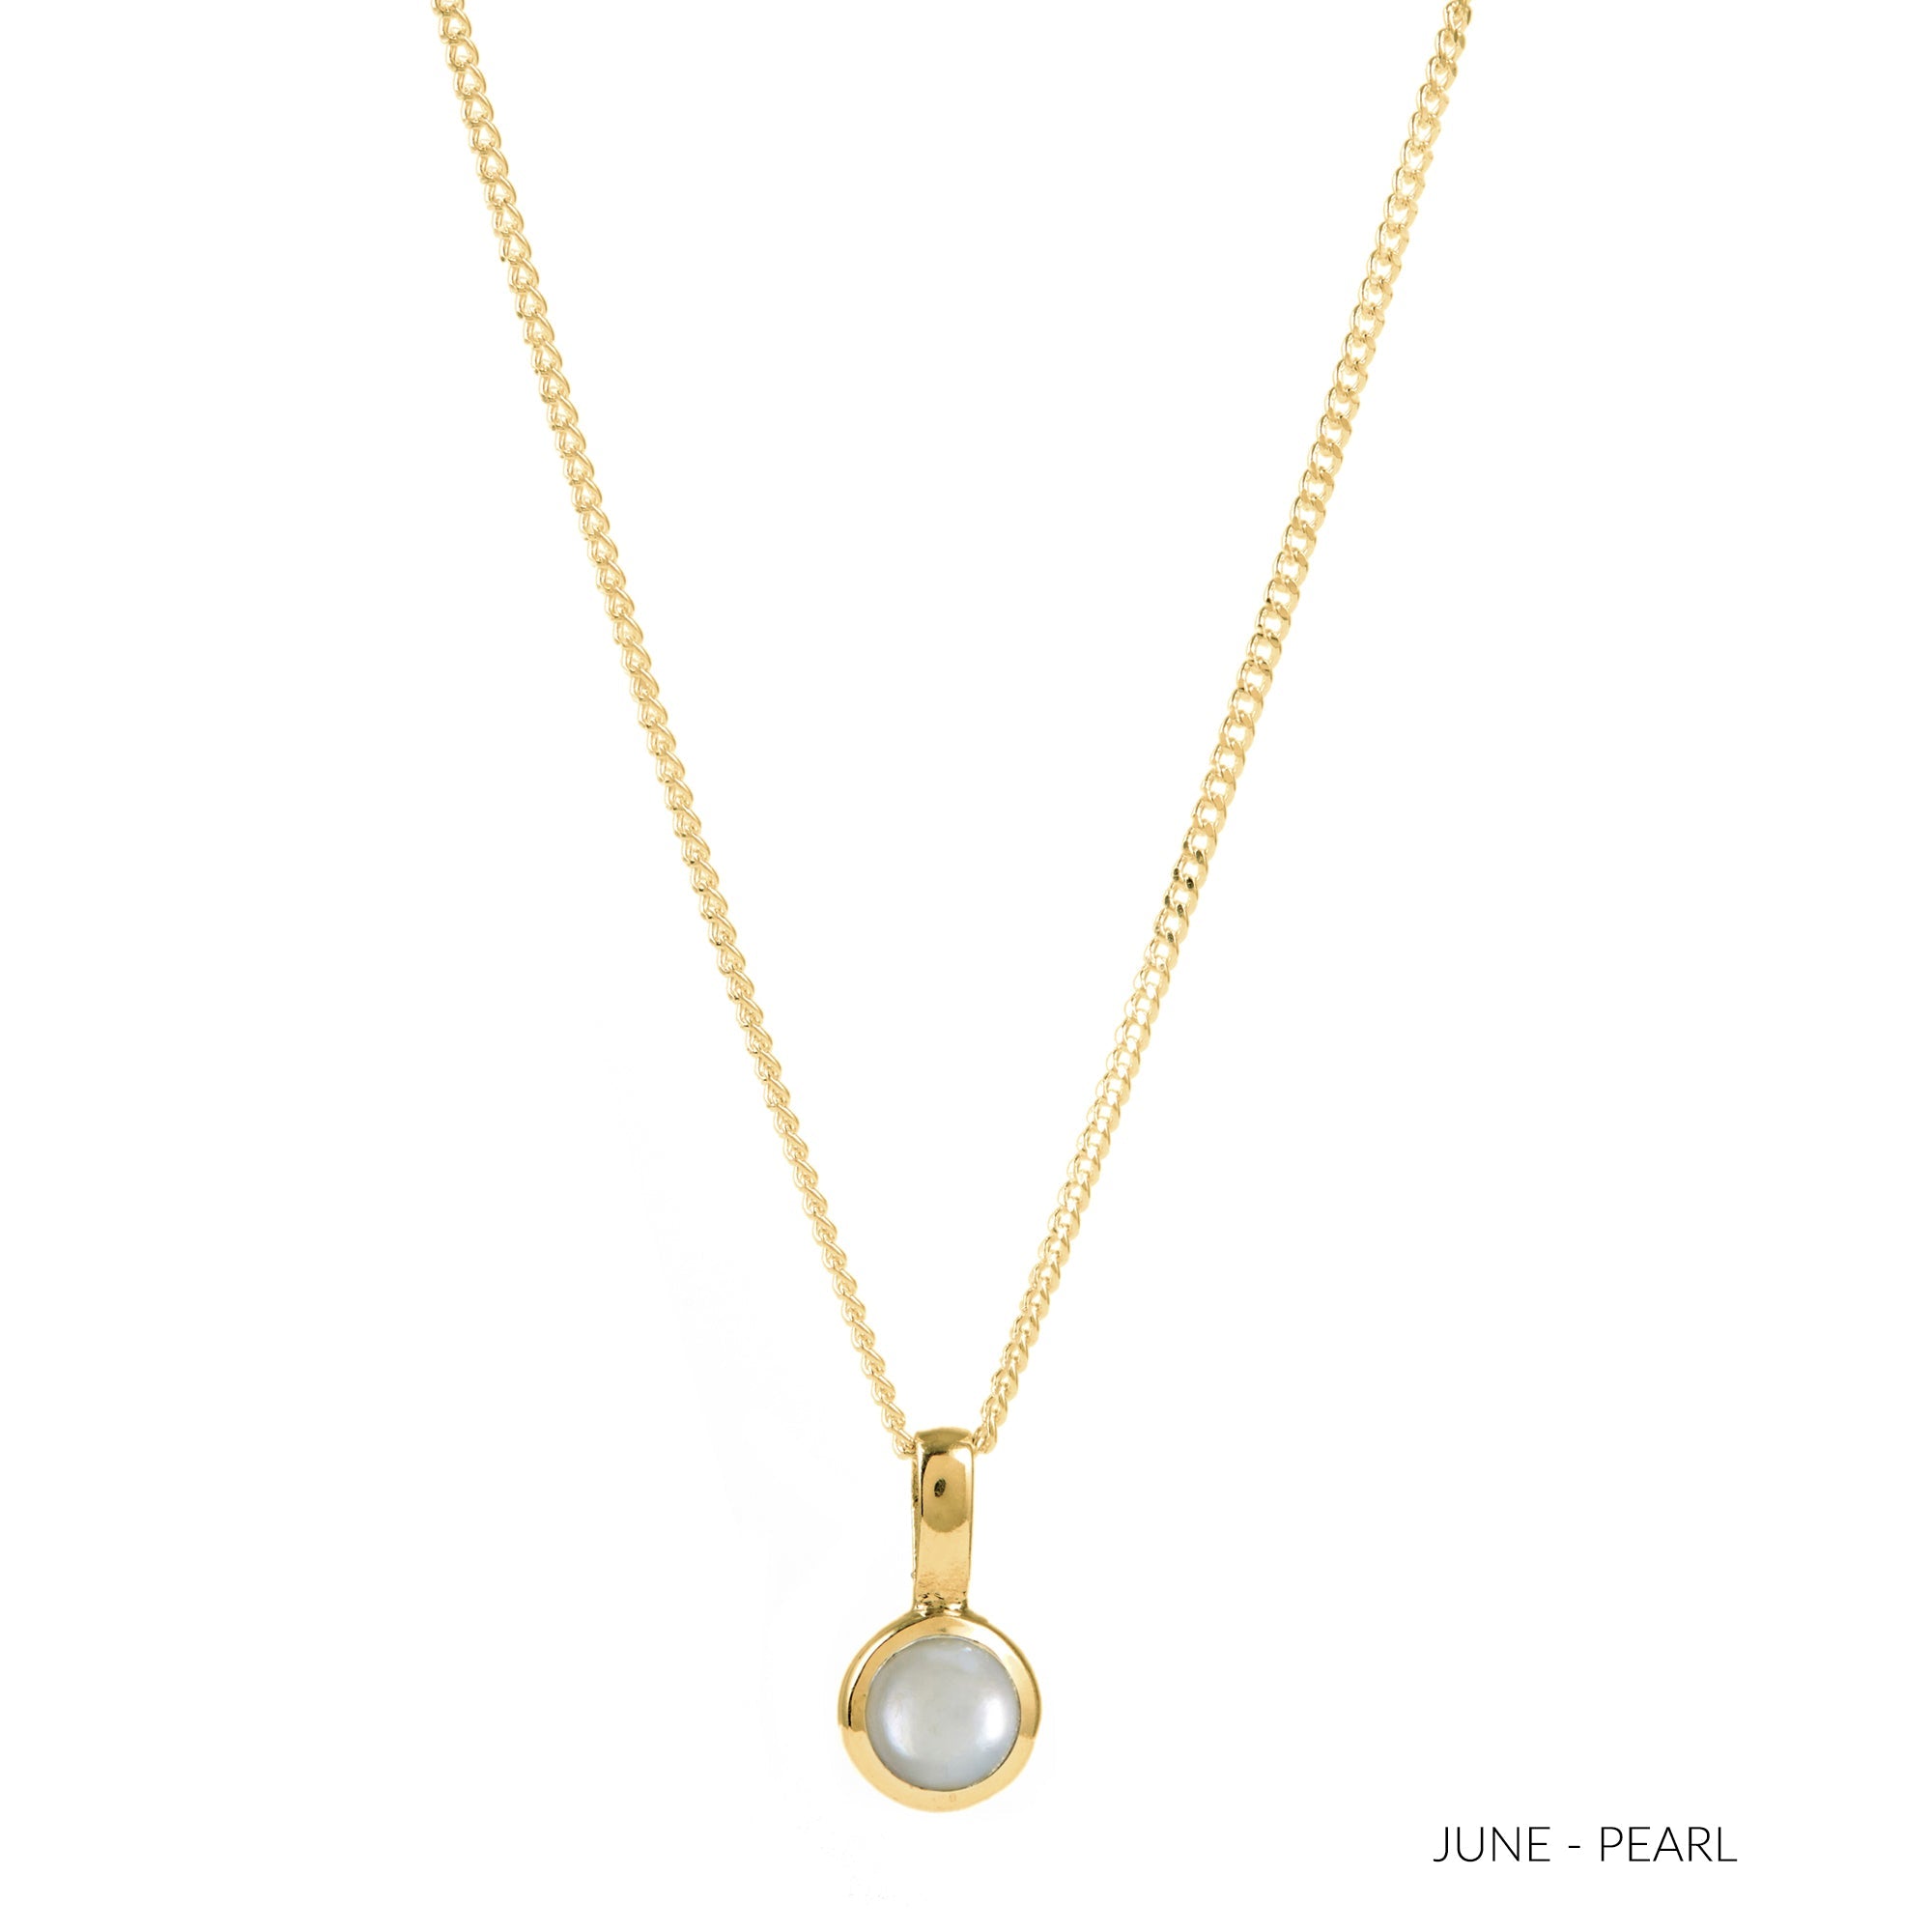 June Birthstone Pearl Charm Necklace